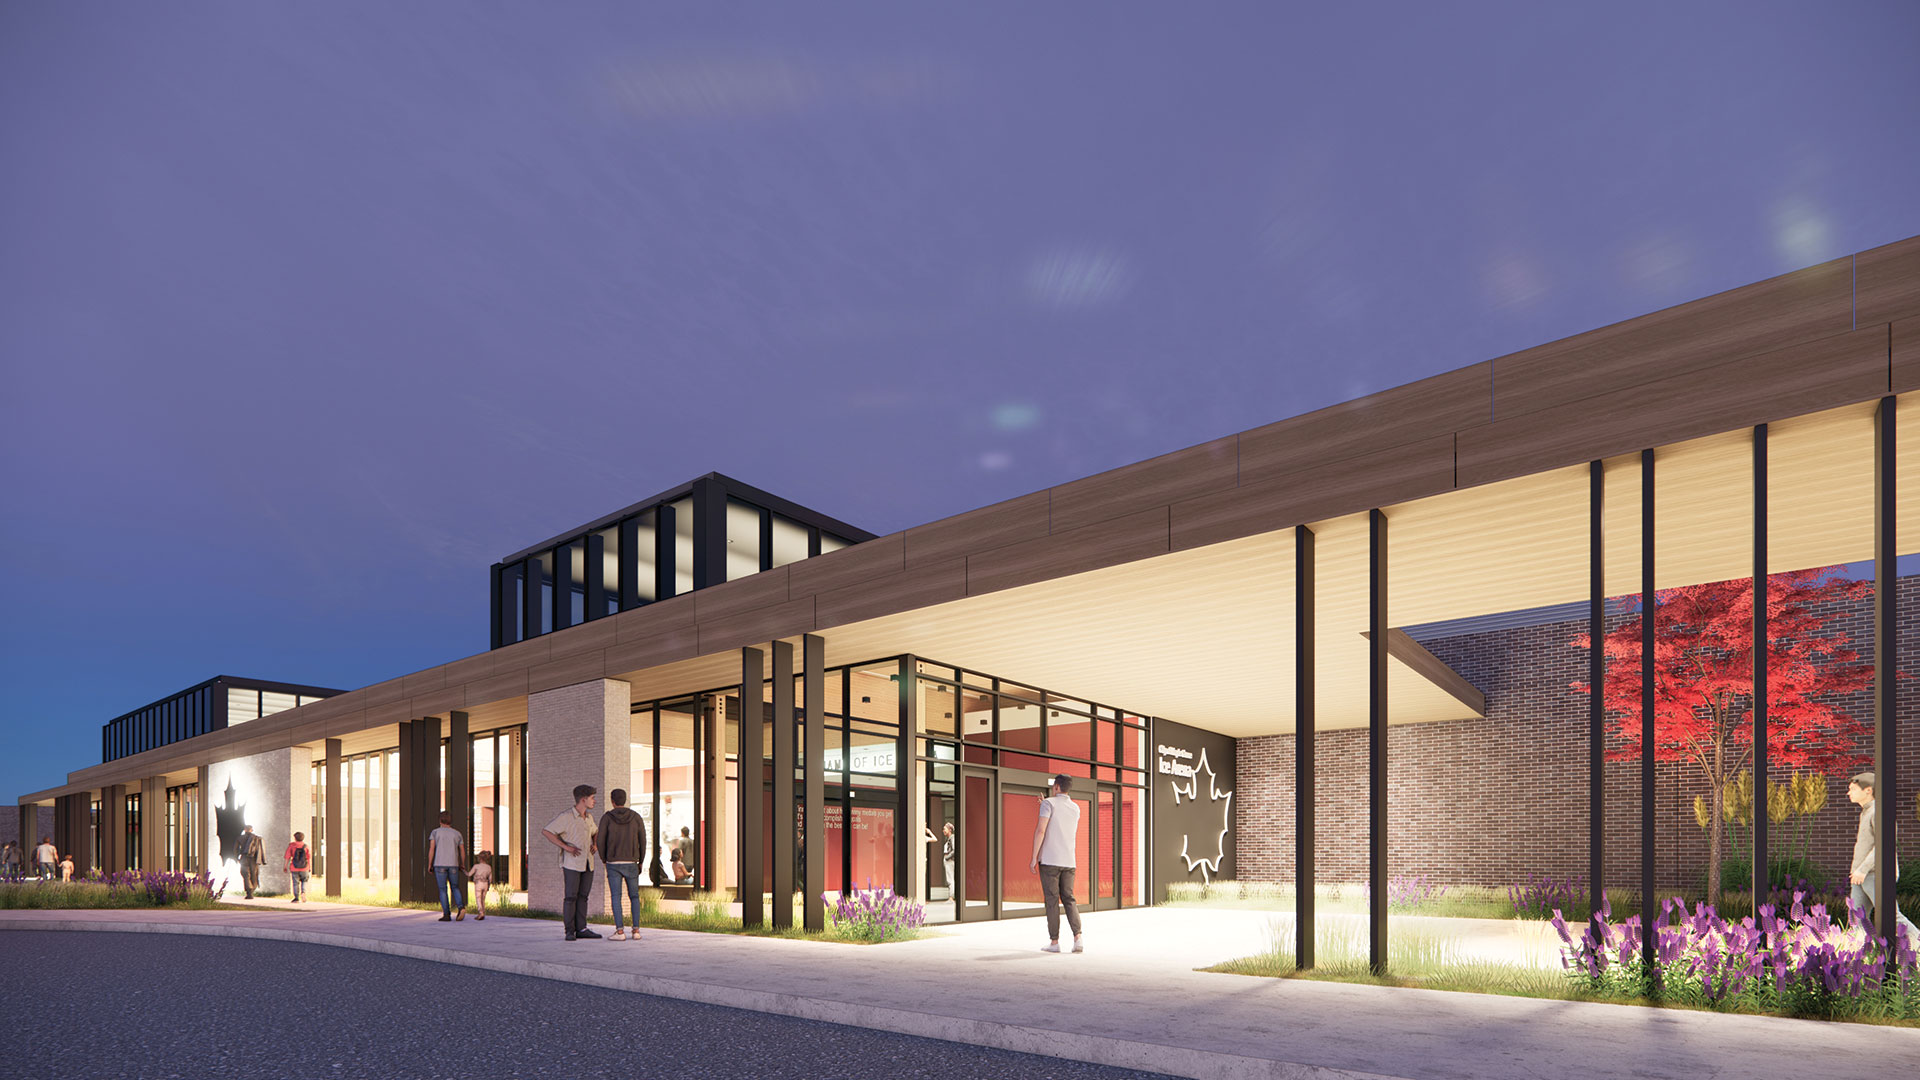 The multimillion-dollar renovation of the Maple Grove Community Center includes building renovations, upgrades, landscaping, aquatic improvements and more.